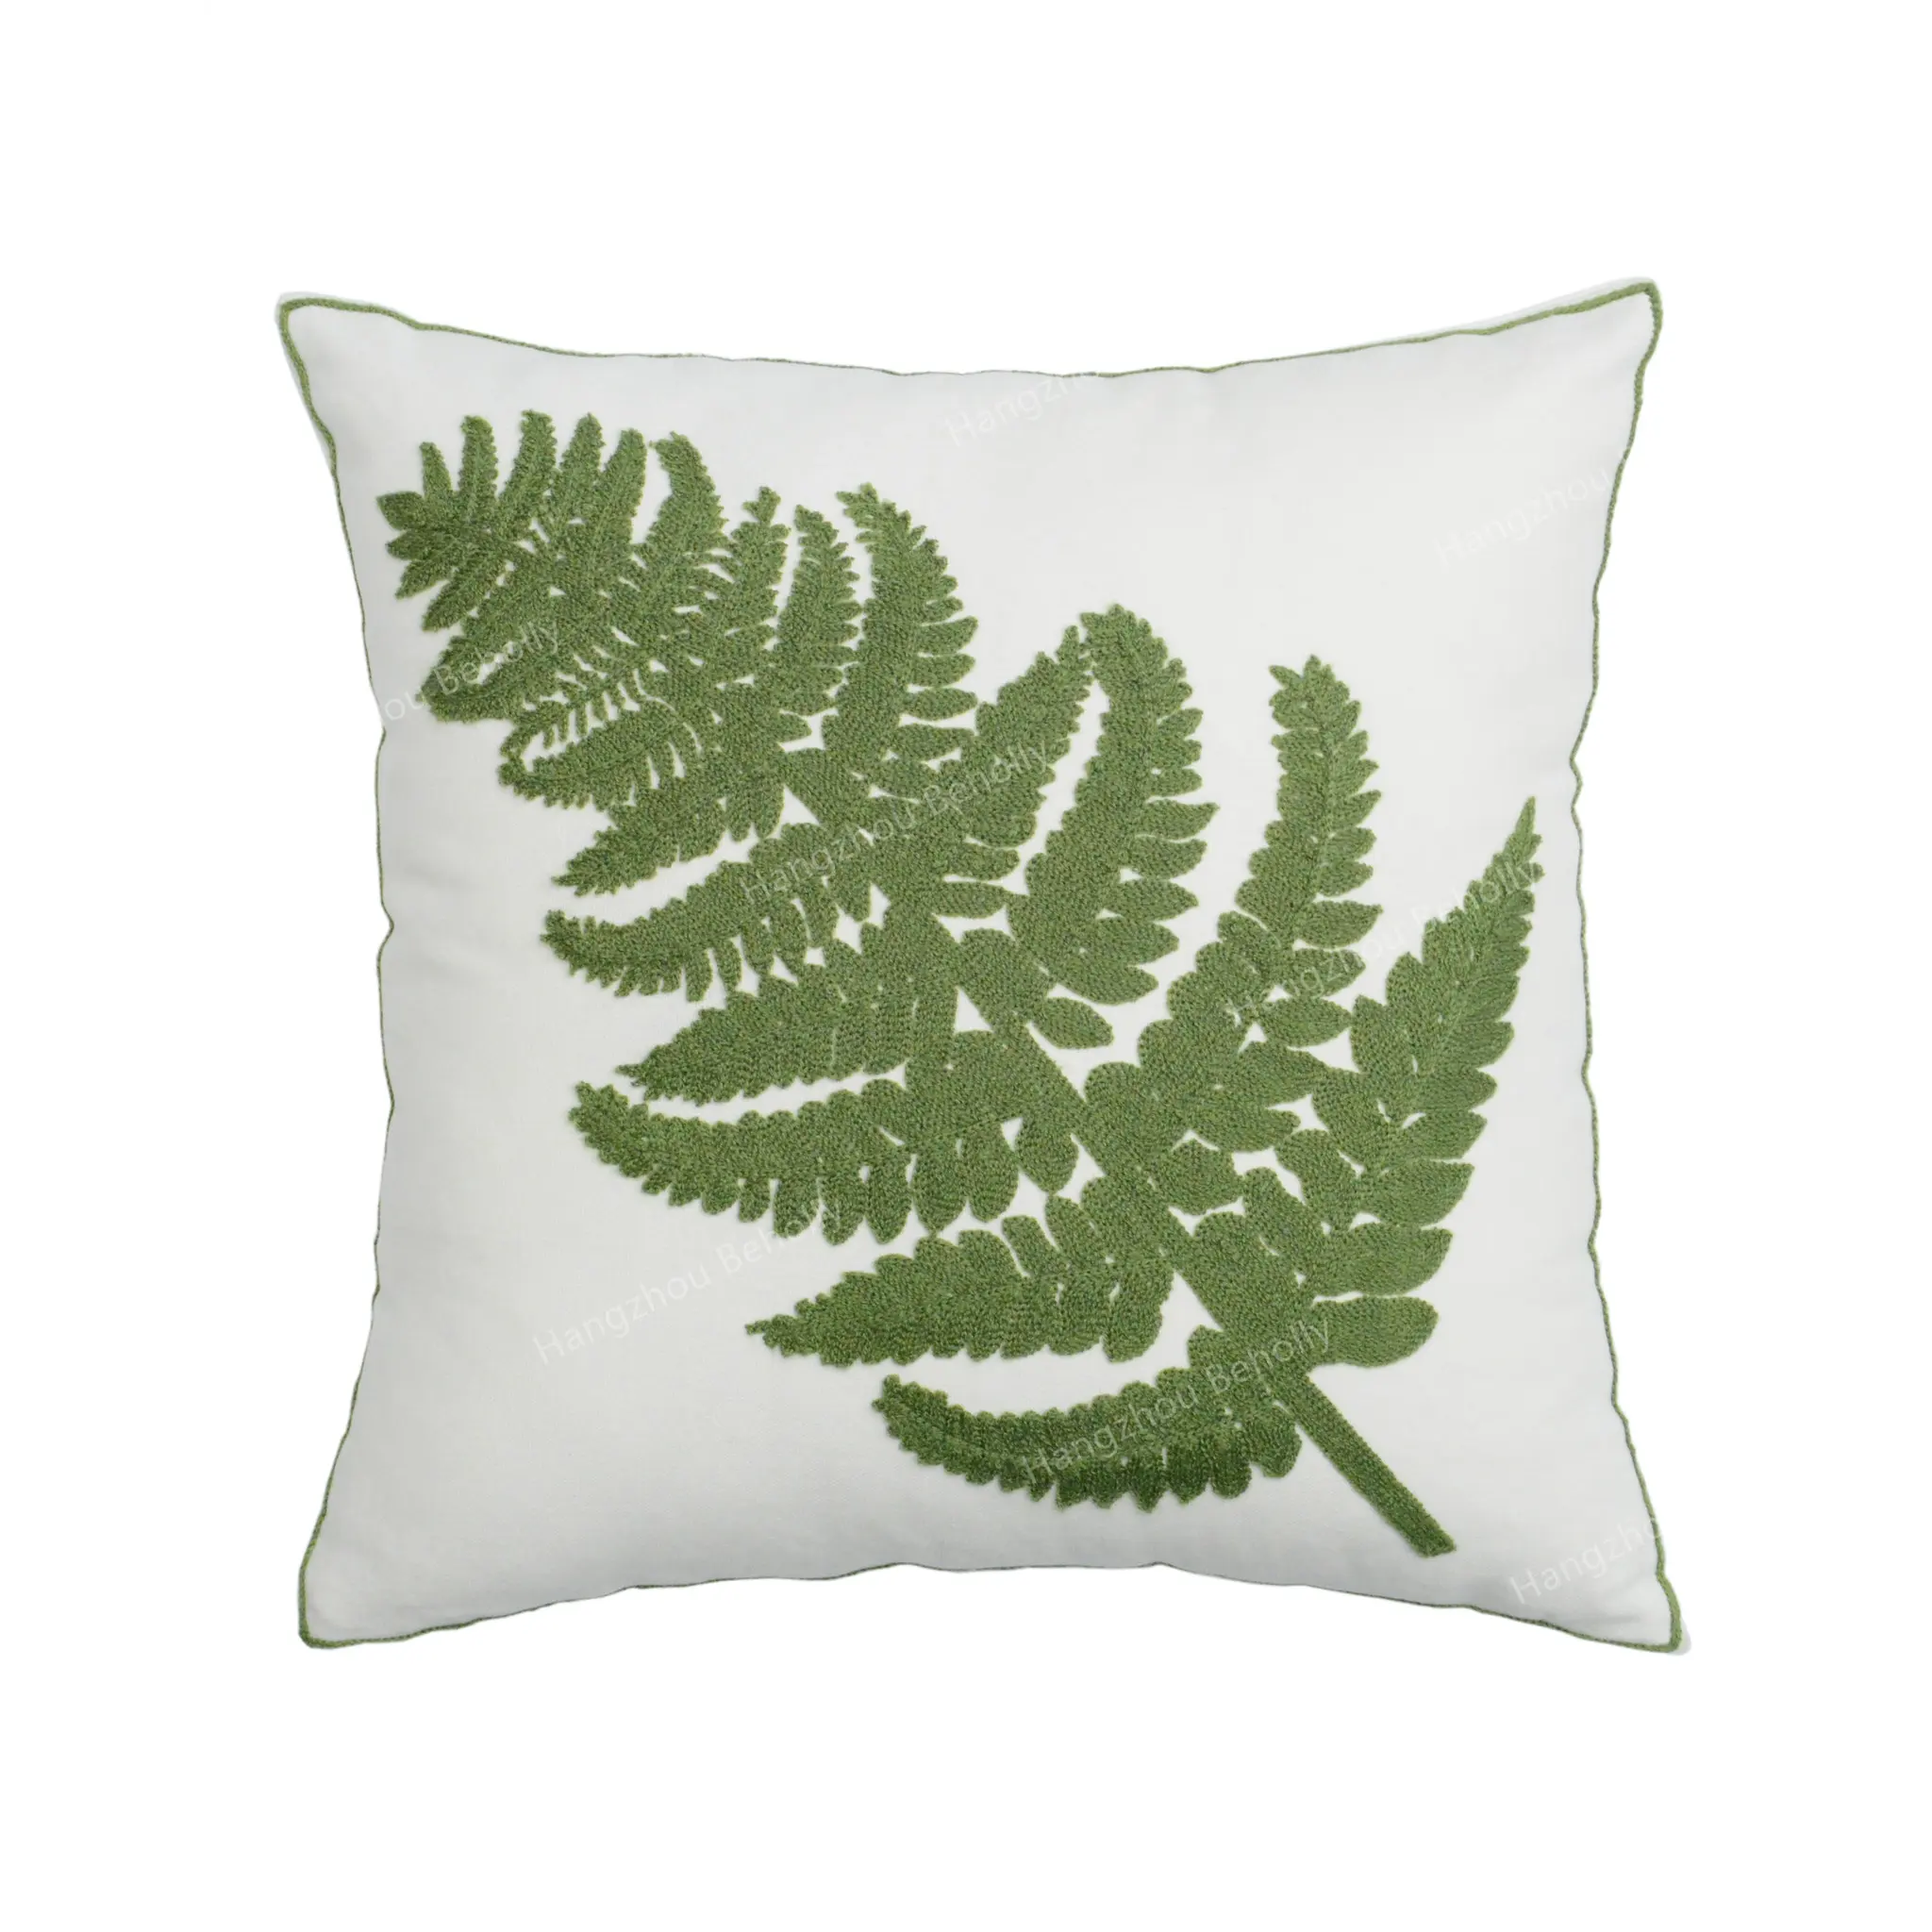 Green Plant Crewel Embroidered Cushion Covers Leaf Decoration Pillow Covers